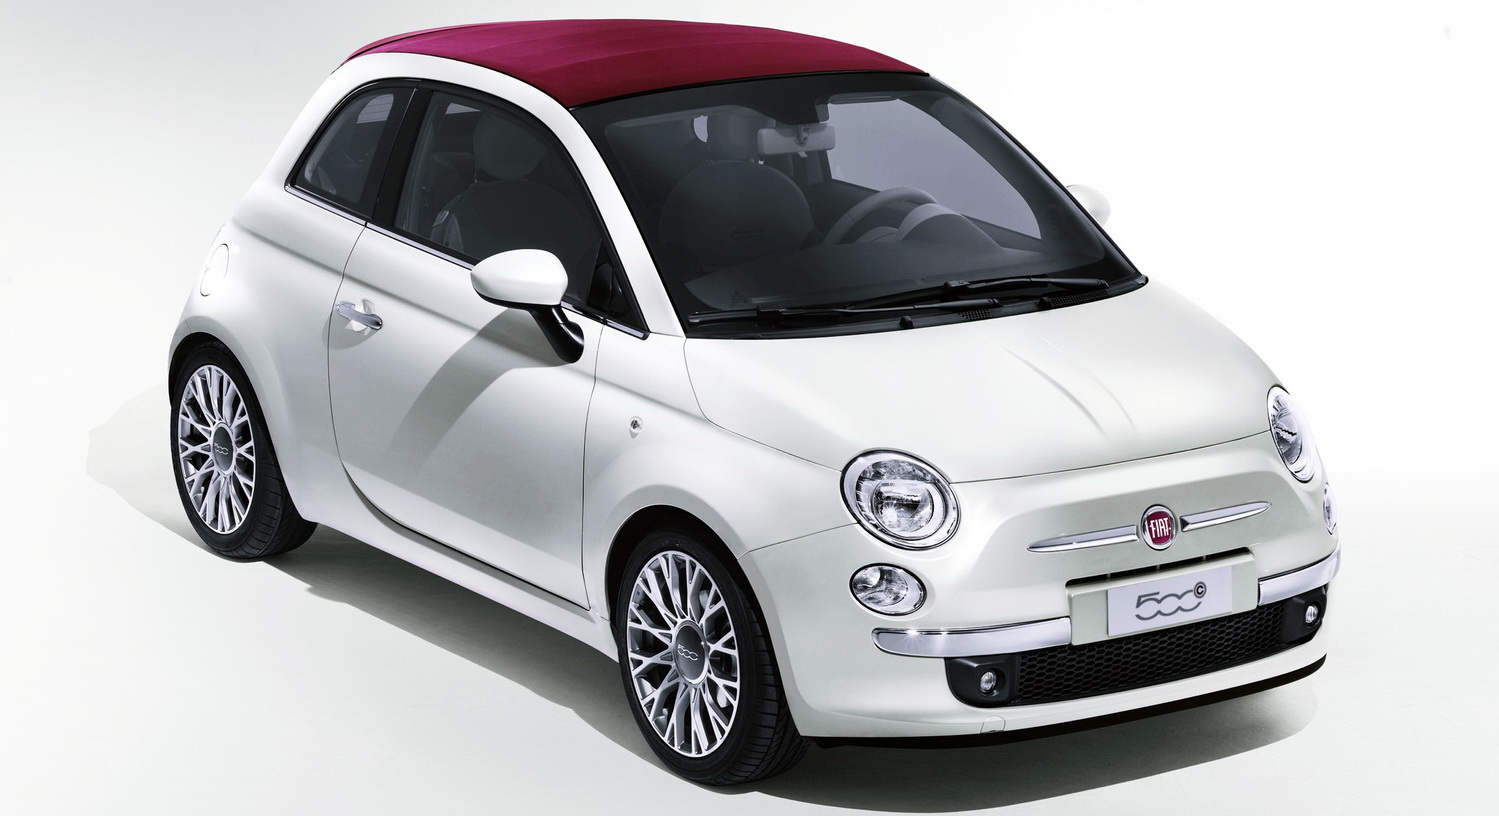 Automotive Car Magazine: Fiat Prices 500 Convertible from £11,300 in the UK